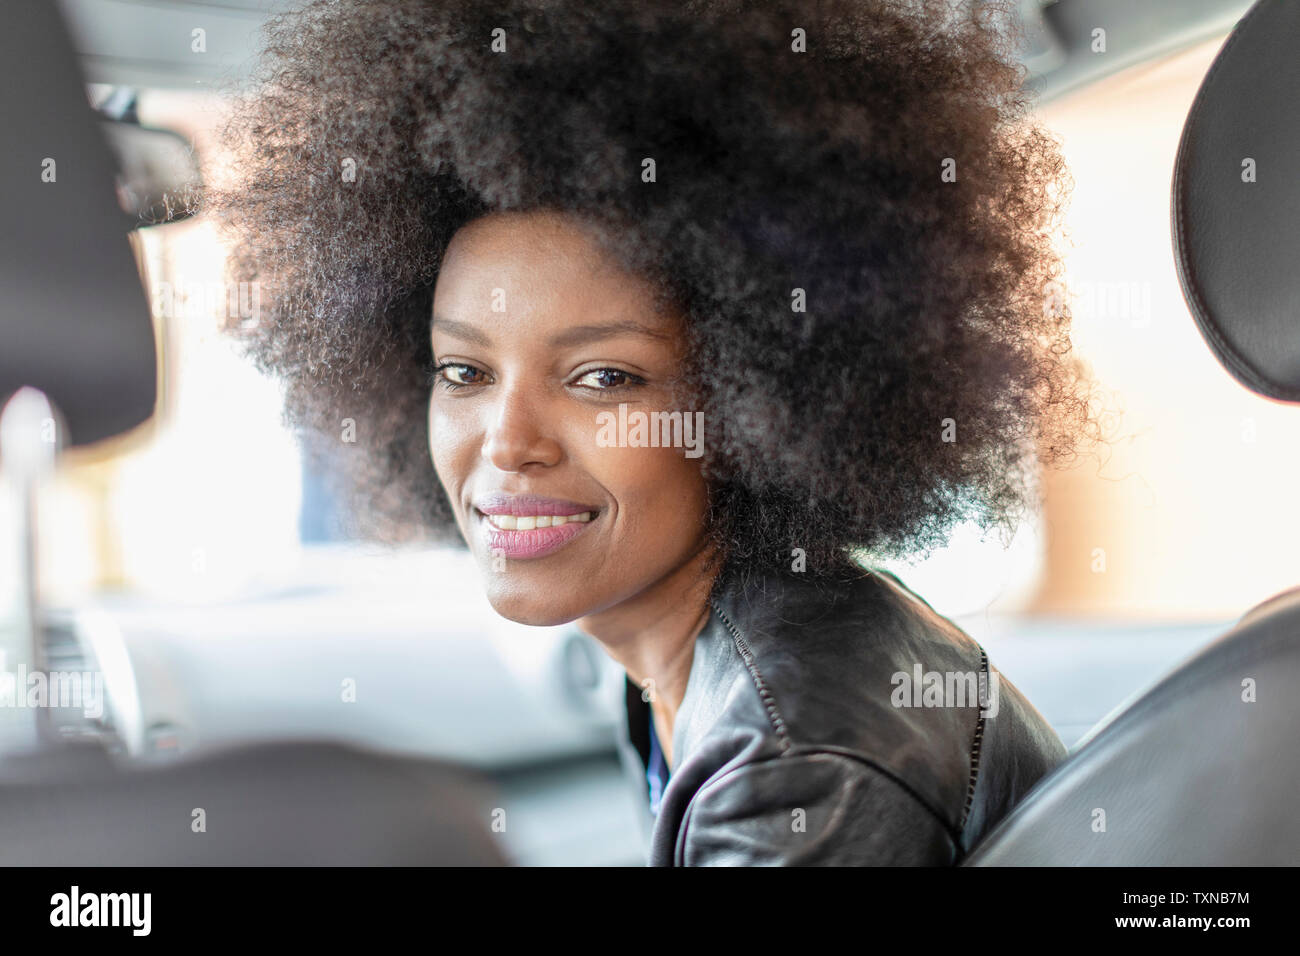 Happy young woman with afro hair in car passenger seat, portrait Stock Photo